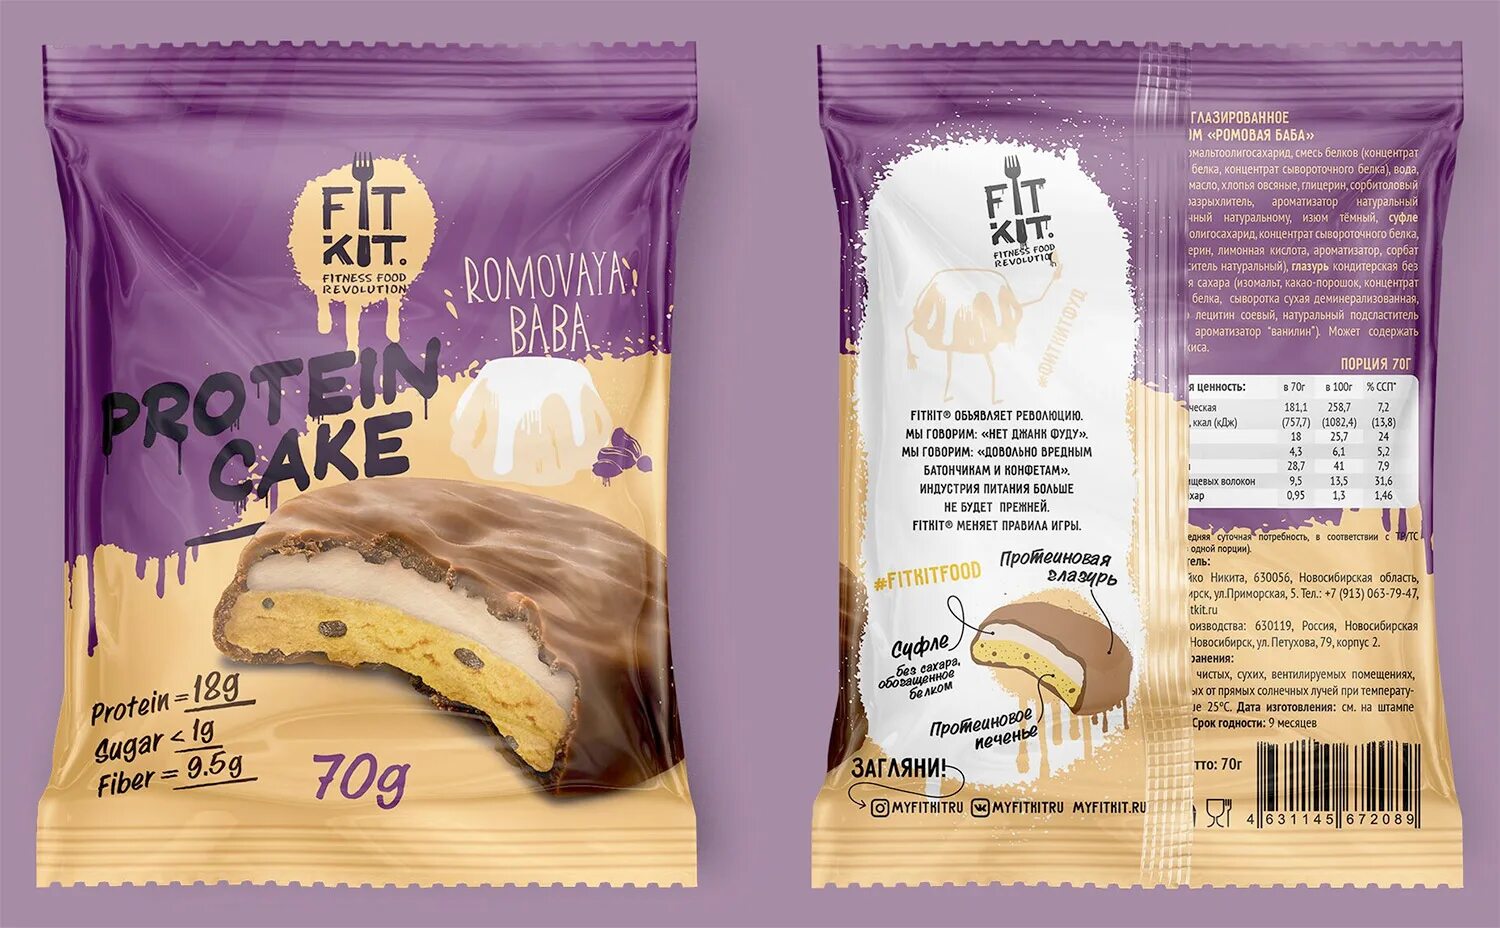 Fitkit. Fit Kit Protein Cake 70 г. Fit Kit, Protein Cake Extra 70 г.. Fit Kit Protein Cake ромовая баба. Fit-Kit Protein Cake 70 г ромовая.